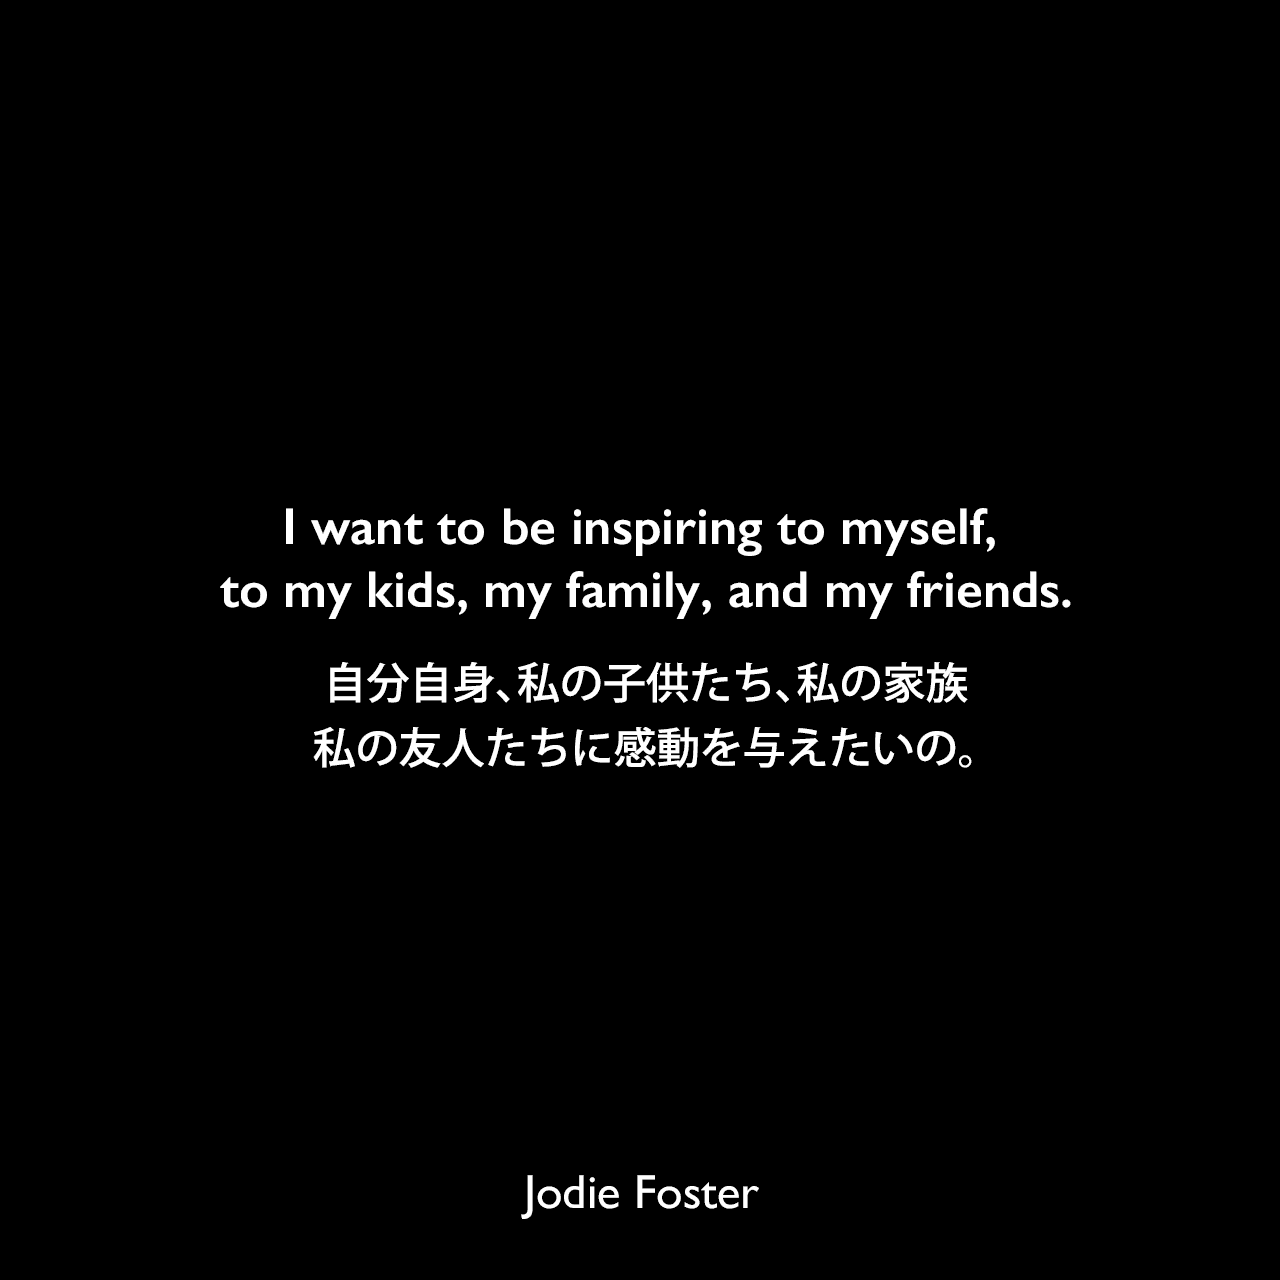 I want to be inspiring to myself, to my kids, my family, and my friends.自分自身、私の子供たち、私の家族、私の友人たちに感動を与えたいの。Jodie Foster